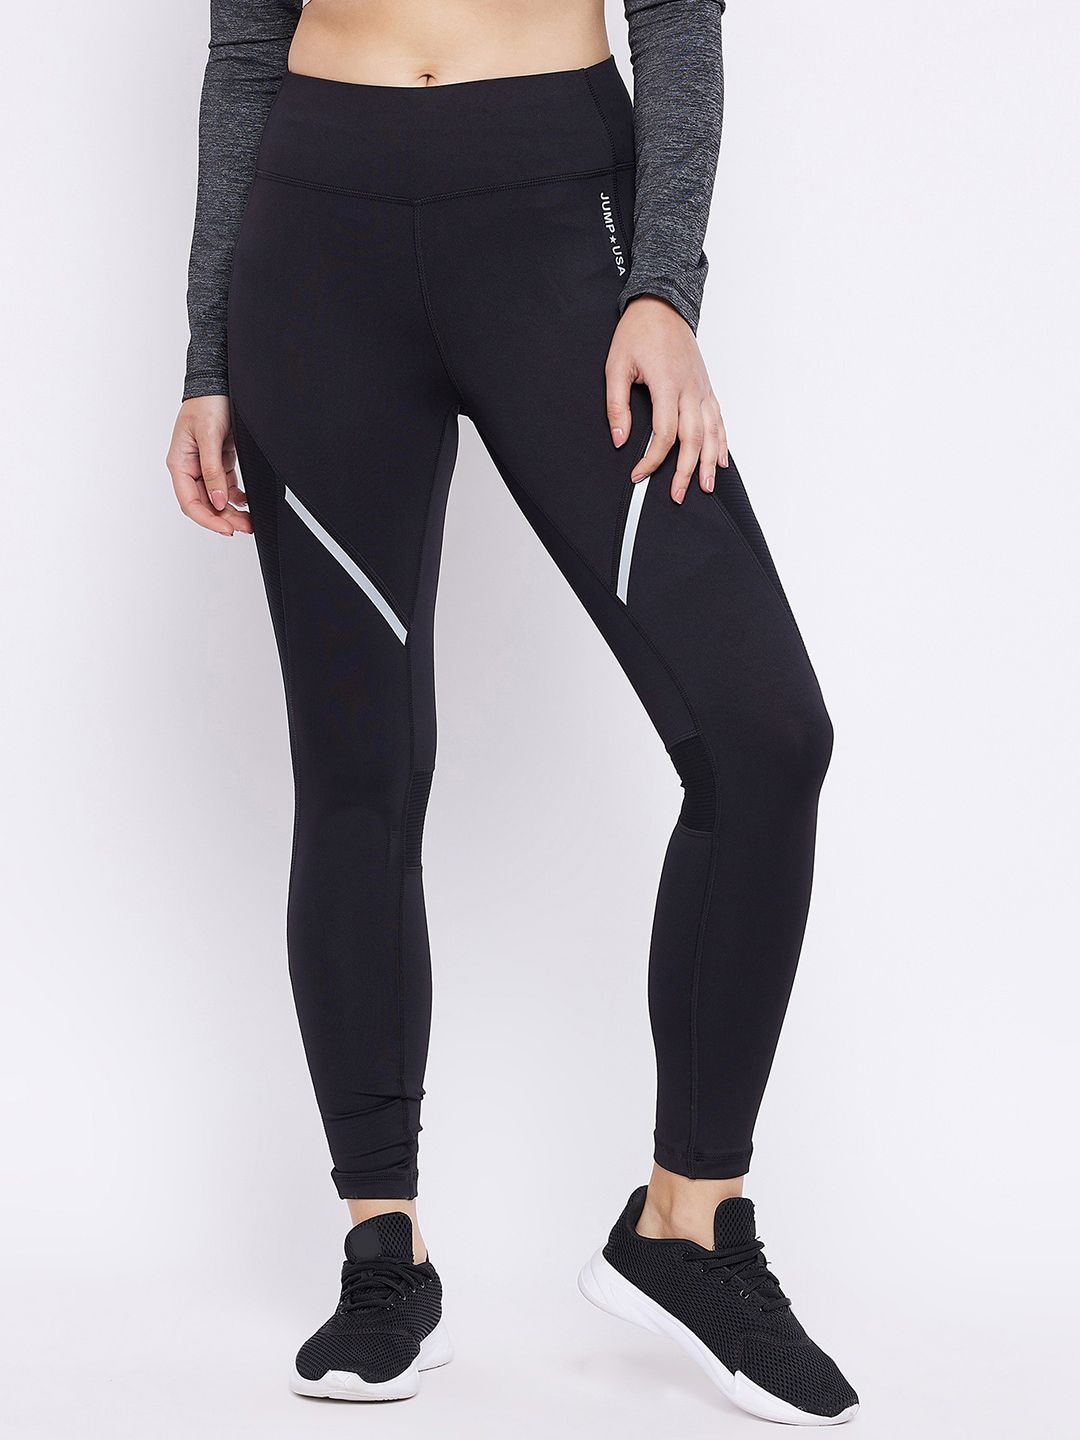 JUMP USA Women Black Solid Tights Price in India